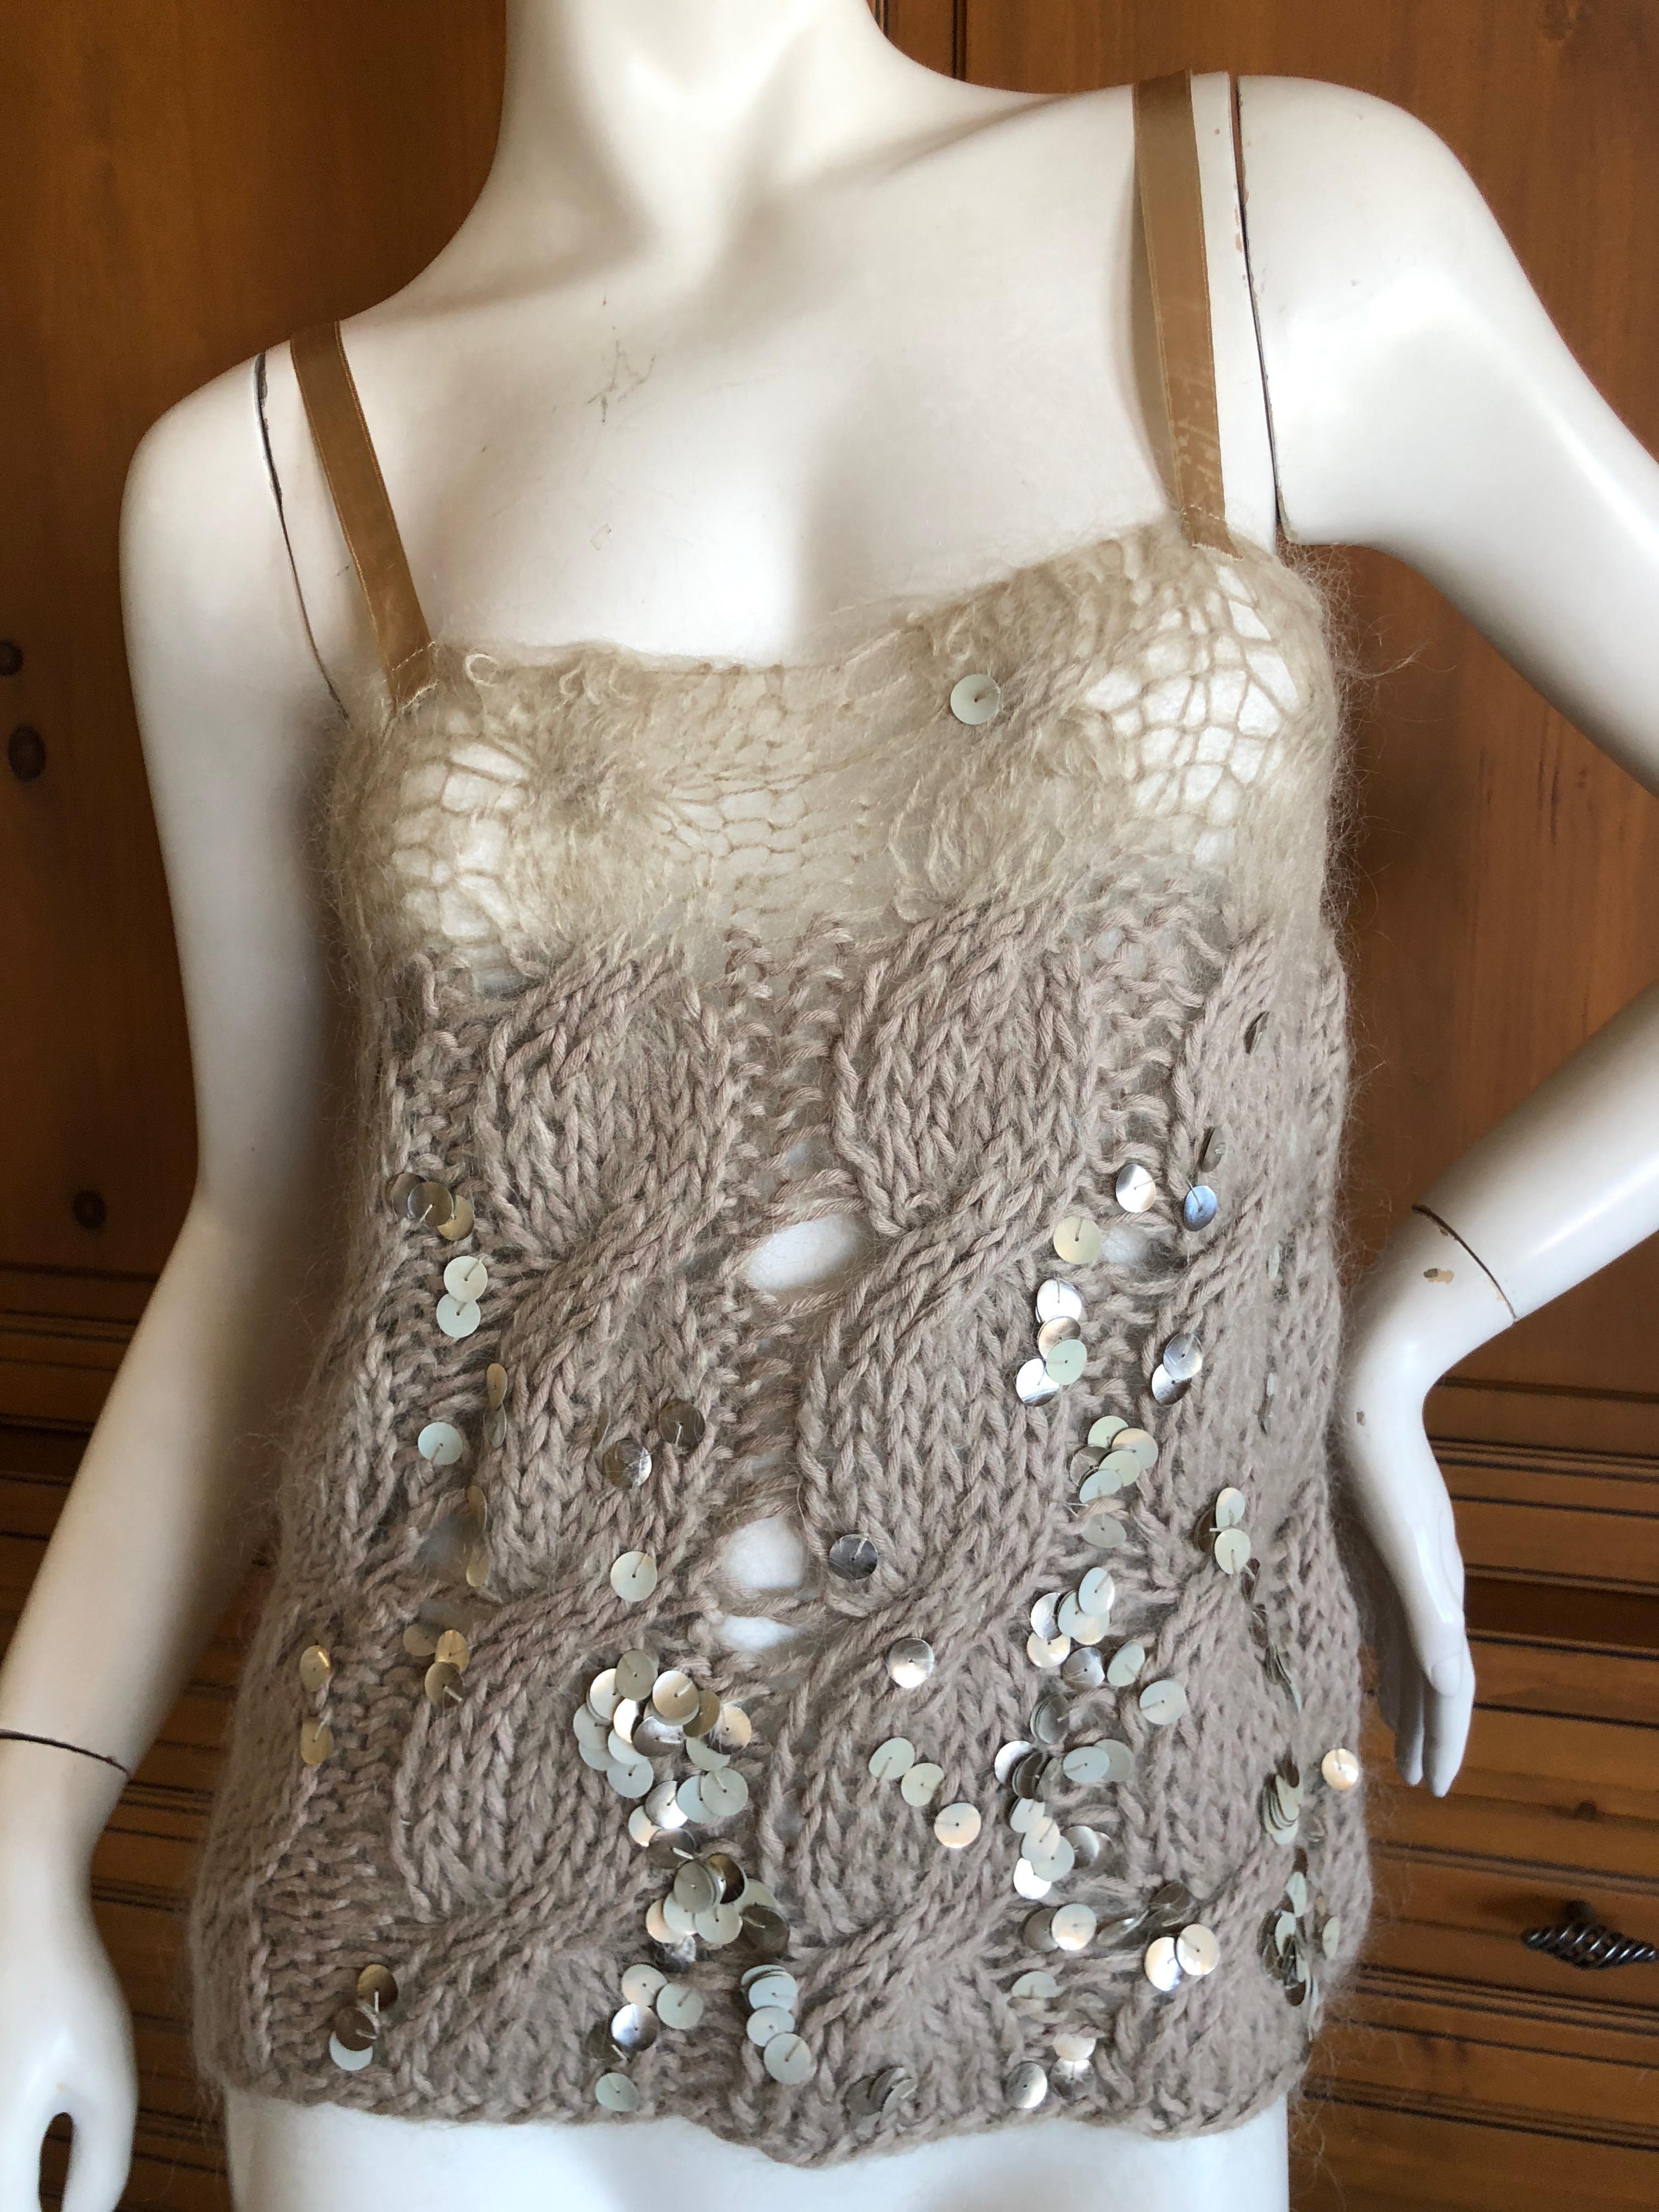 Josephus Thimester Loose Knit Cable Knit Camisole with Sequins
Size S
Bust 36